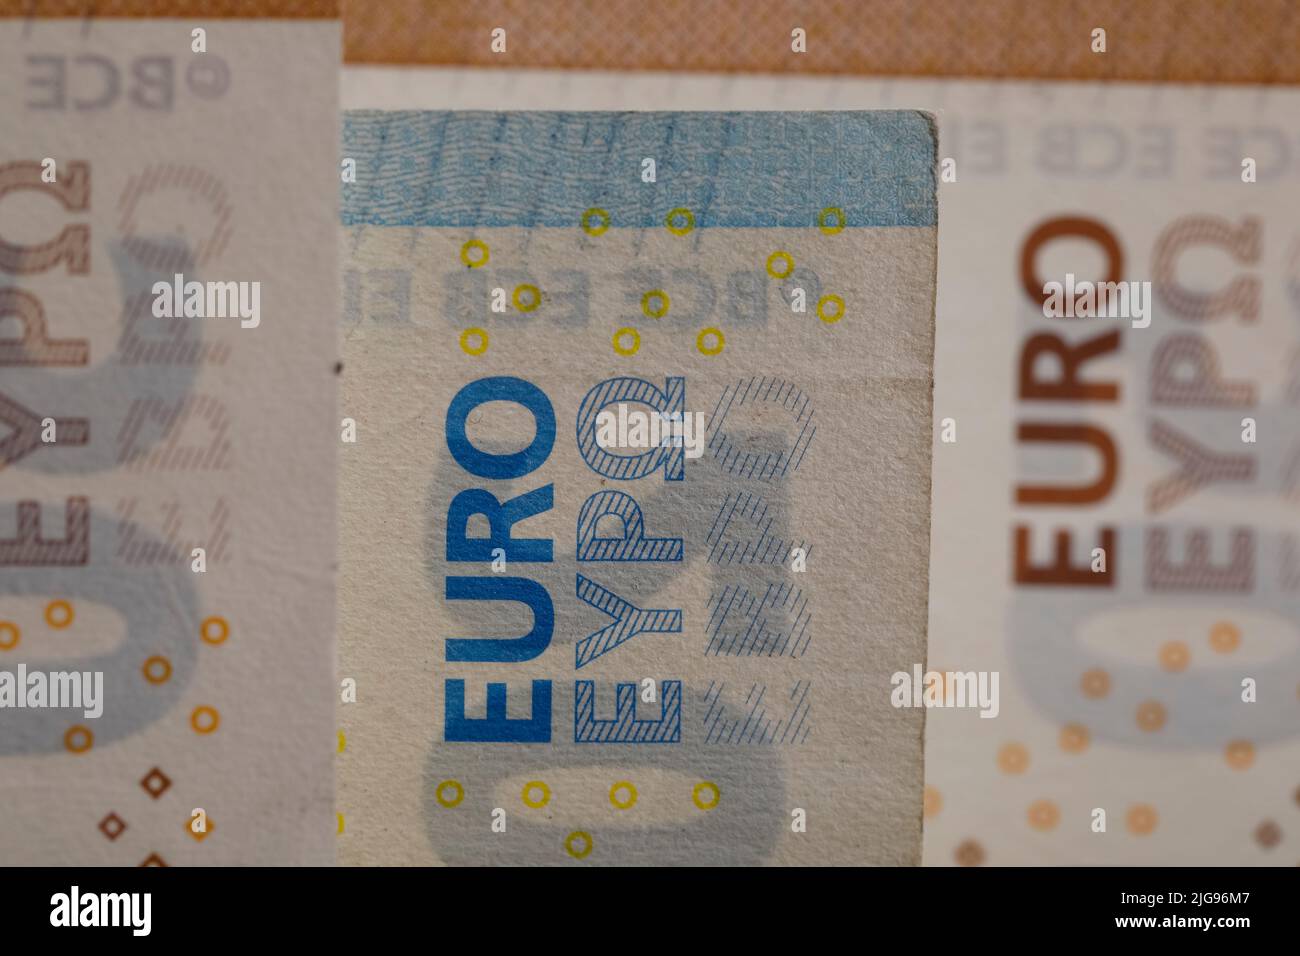 A few notes of Euro currency. The currency of the euro area have been in circulation since 2002 and Euro banknotes are not made of paper, but of pure Stock Photo